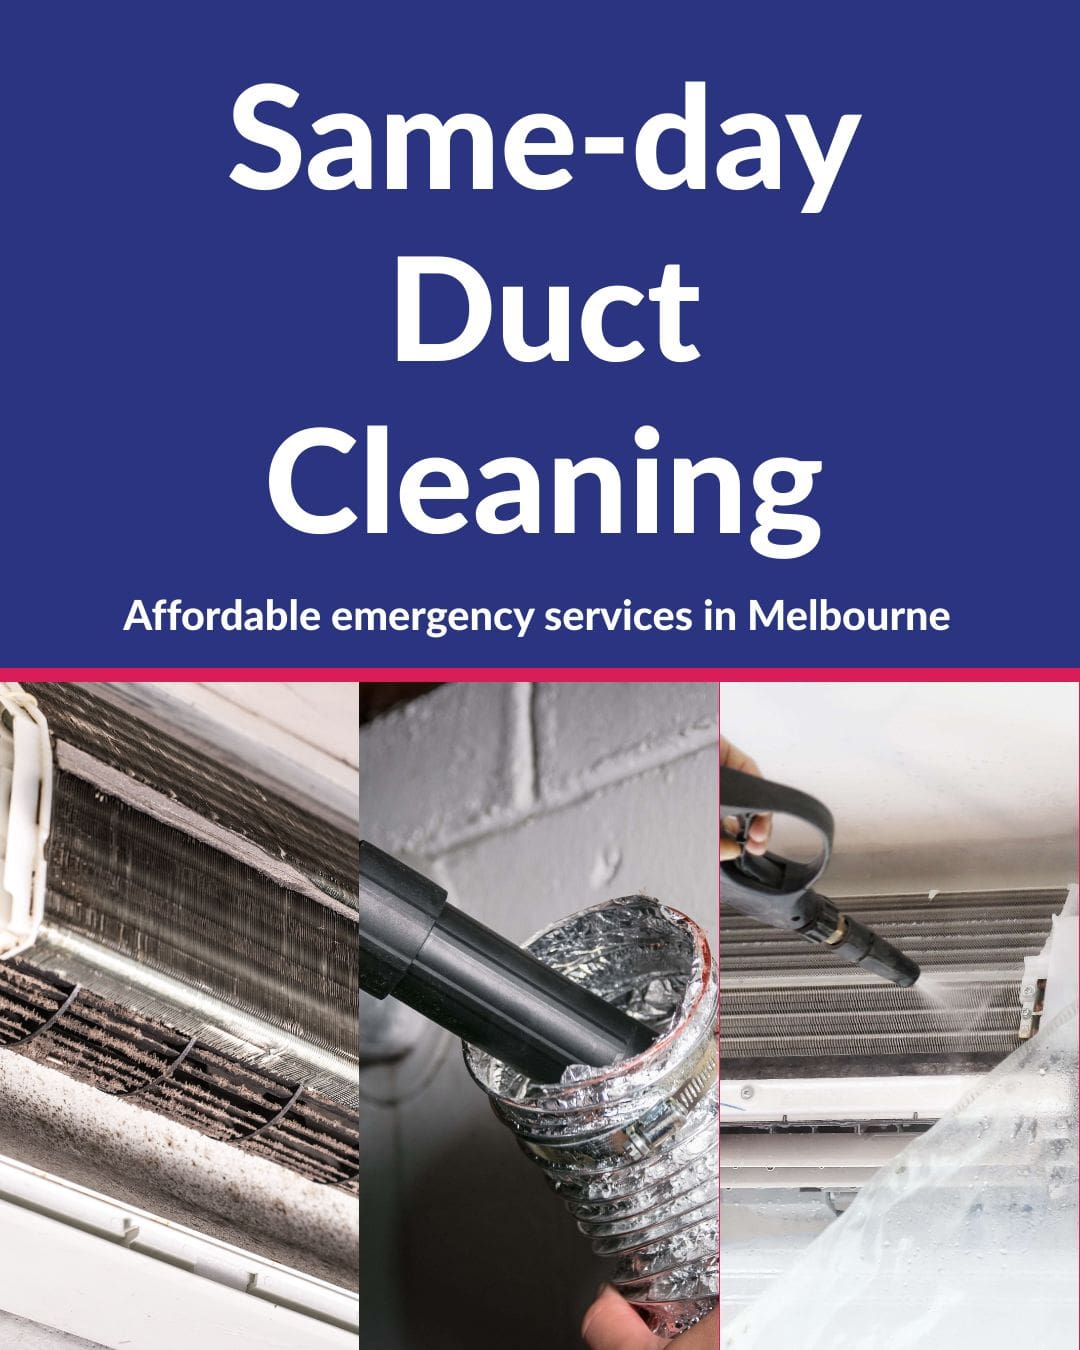 Same-day duct clean service